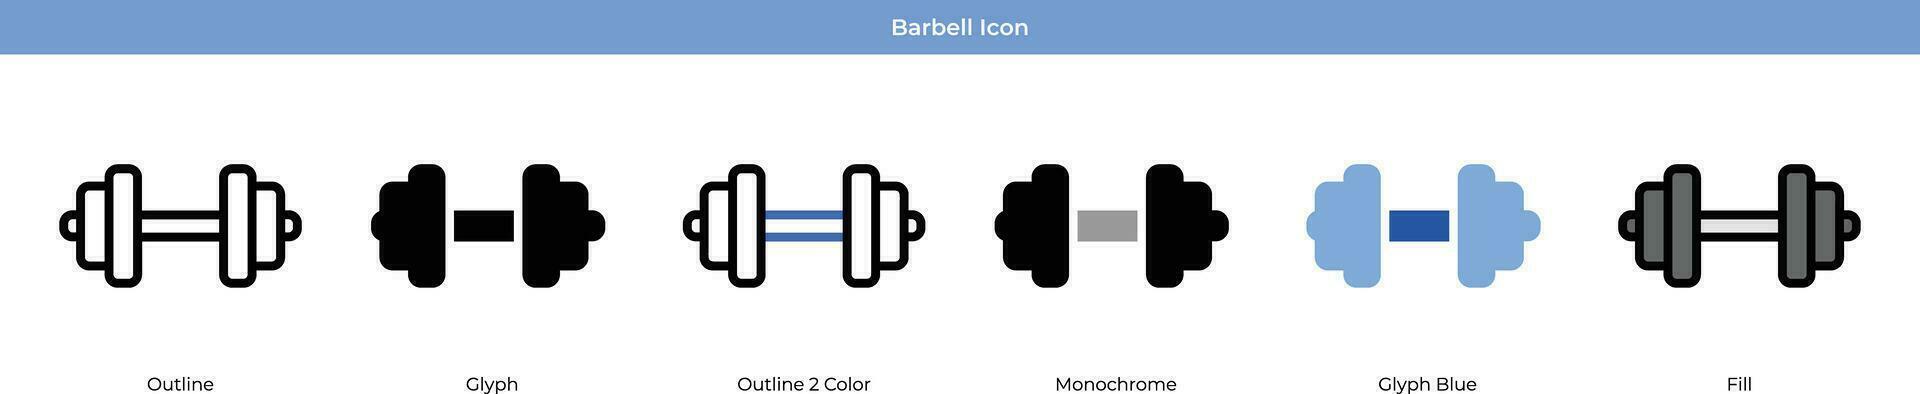 barbell vector icoon